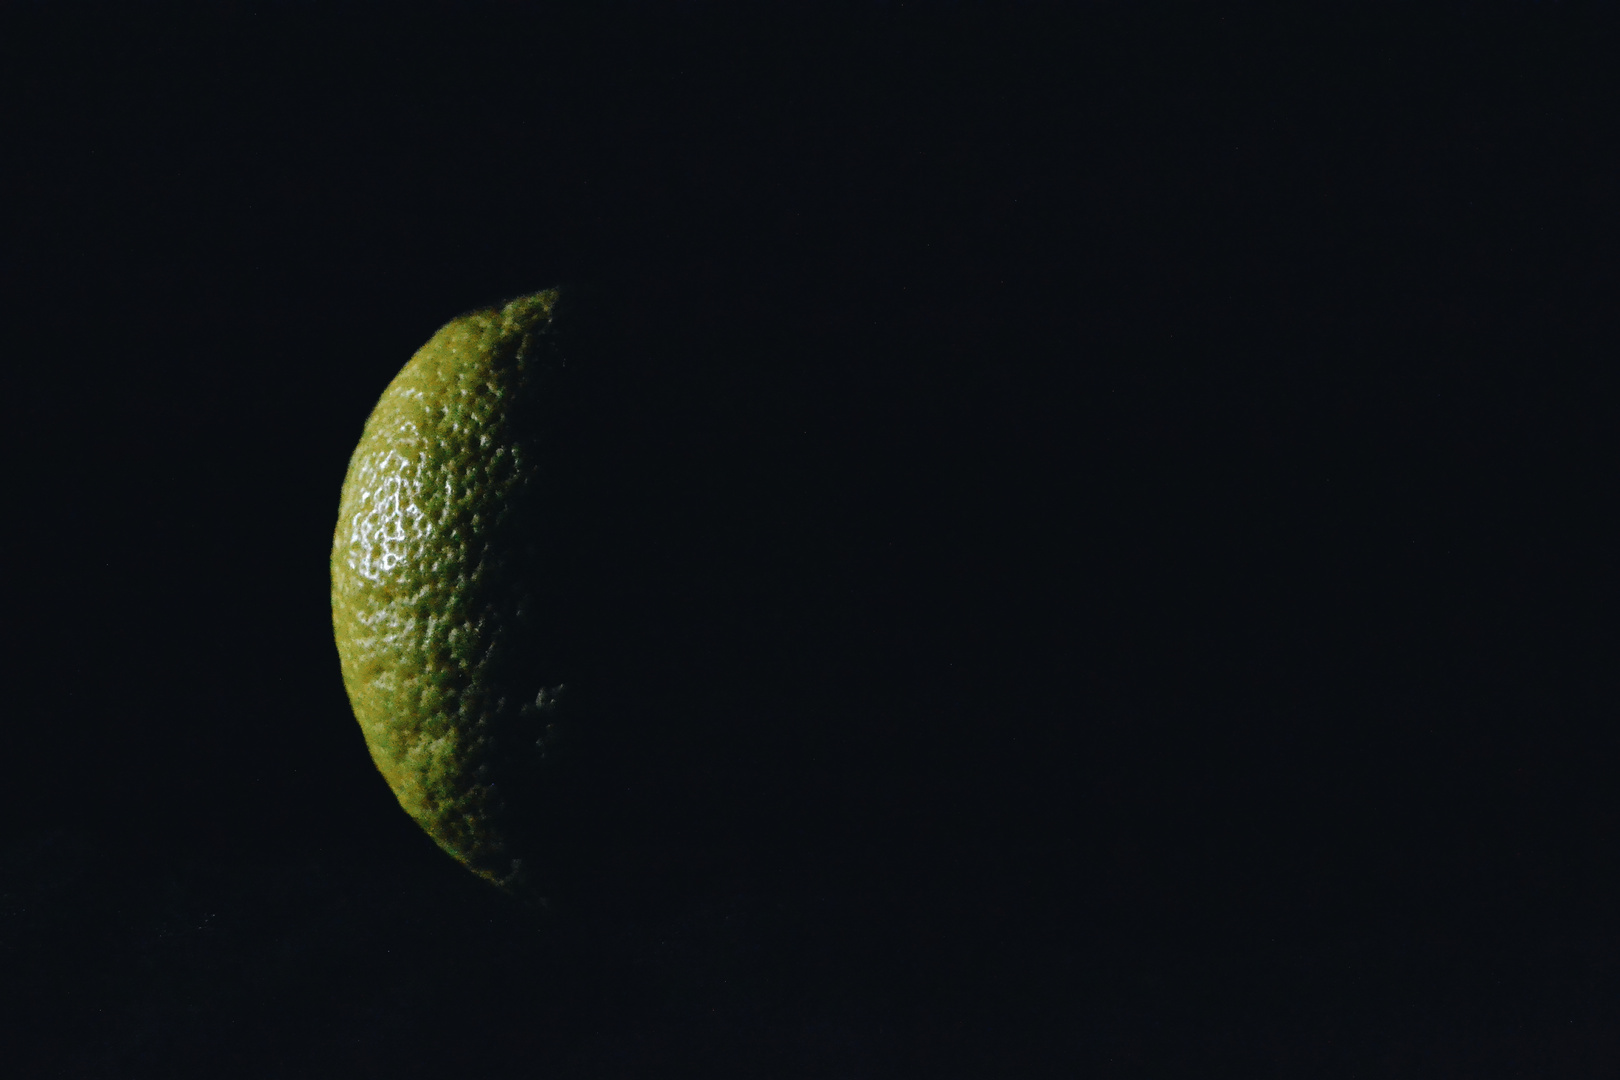 eclipse or..lime?